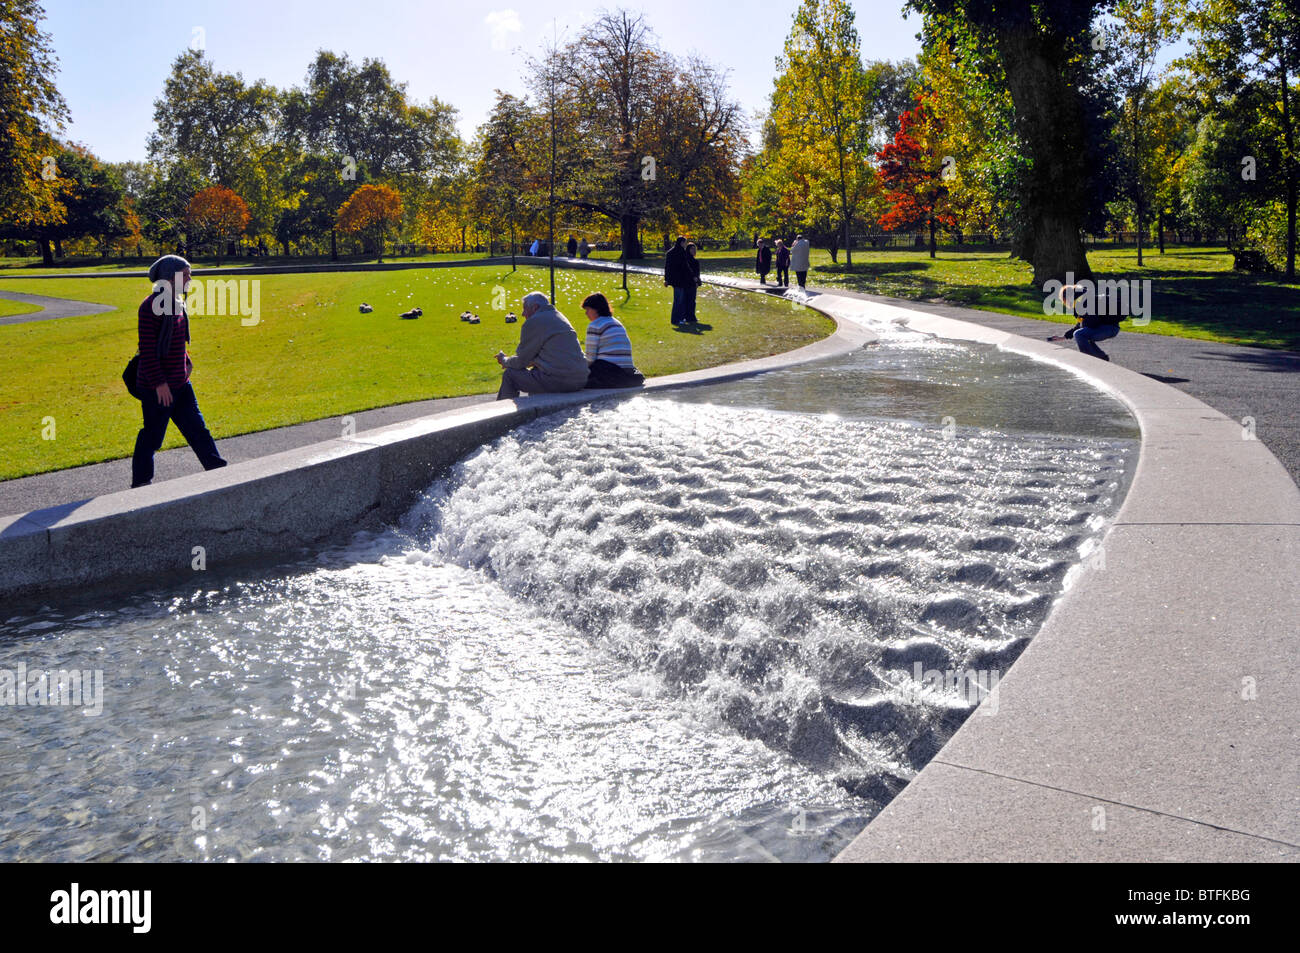 People at Princess Diana memorial fountain Hyde Park forms a circular artificial rill water feature with Autumn colours on trees London England UK Stock Photo